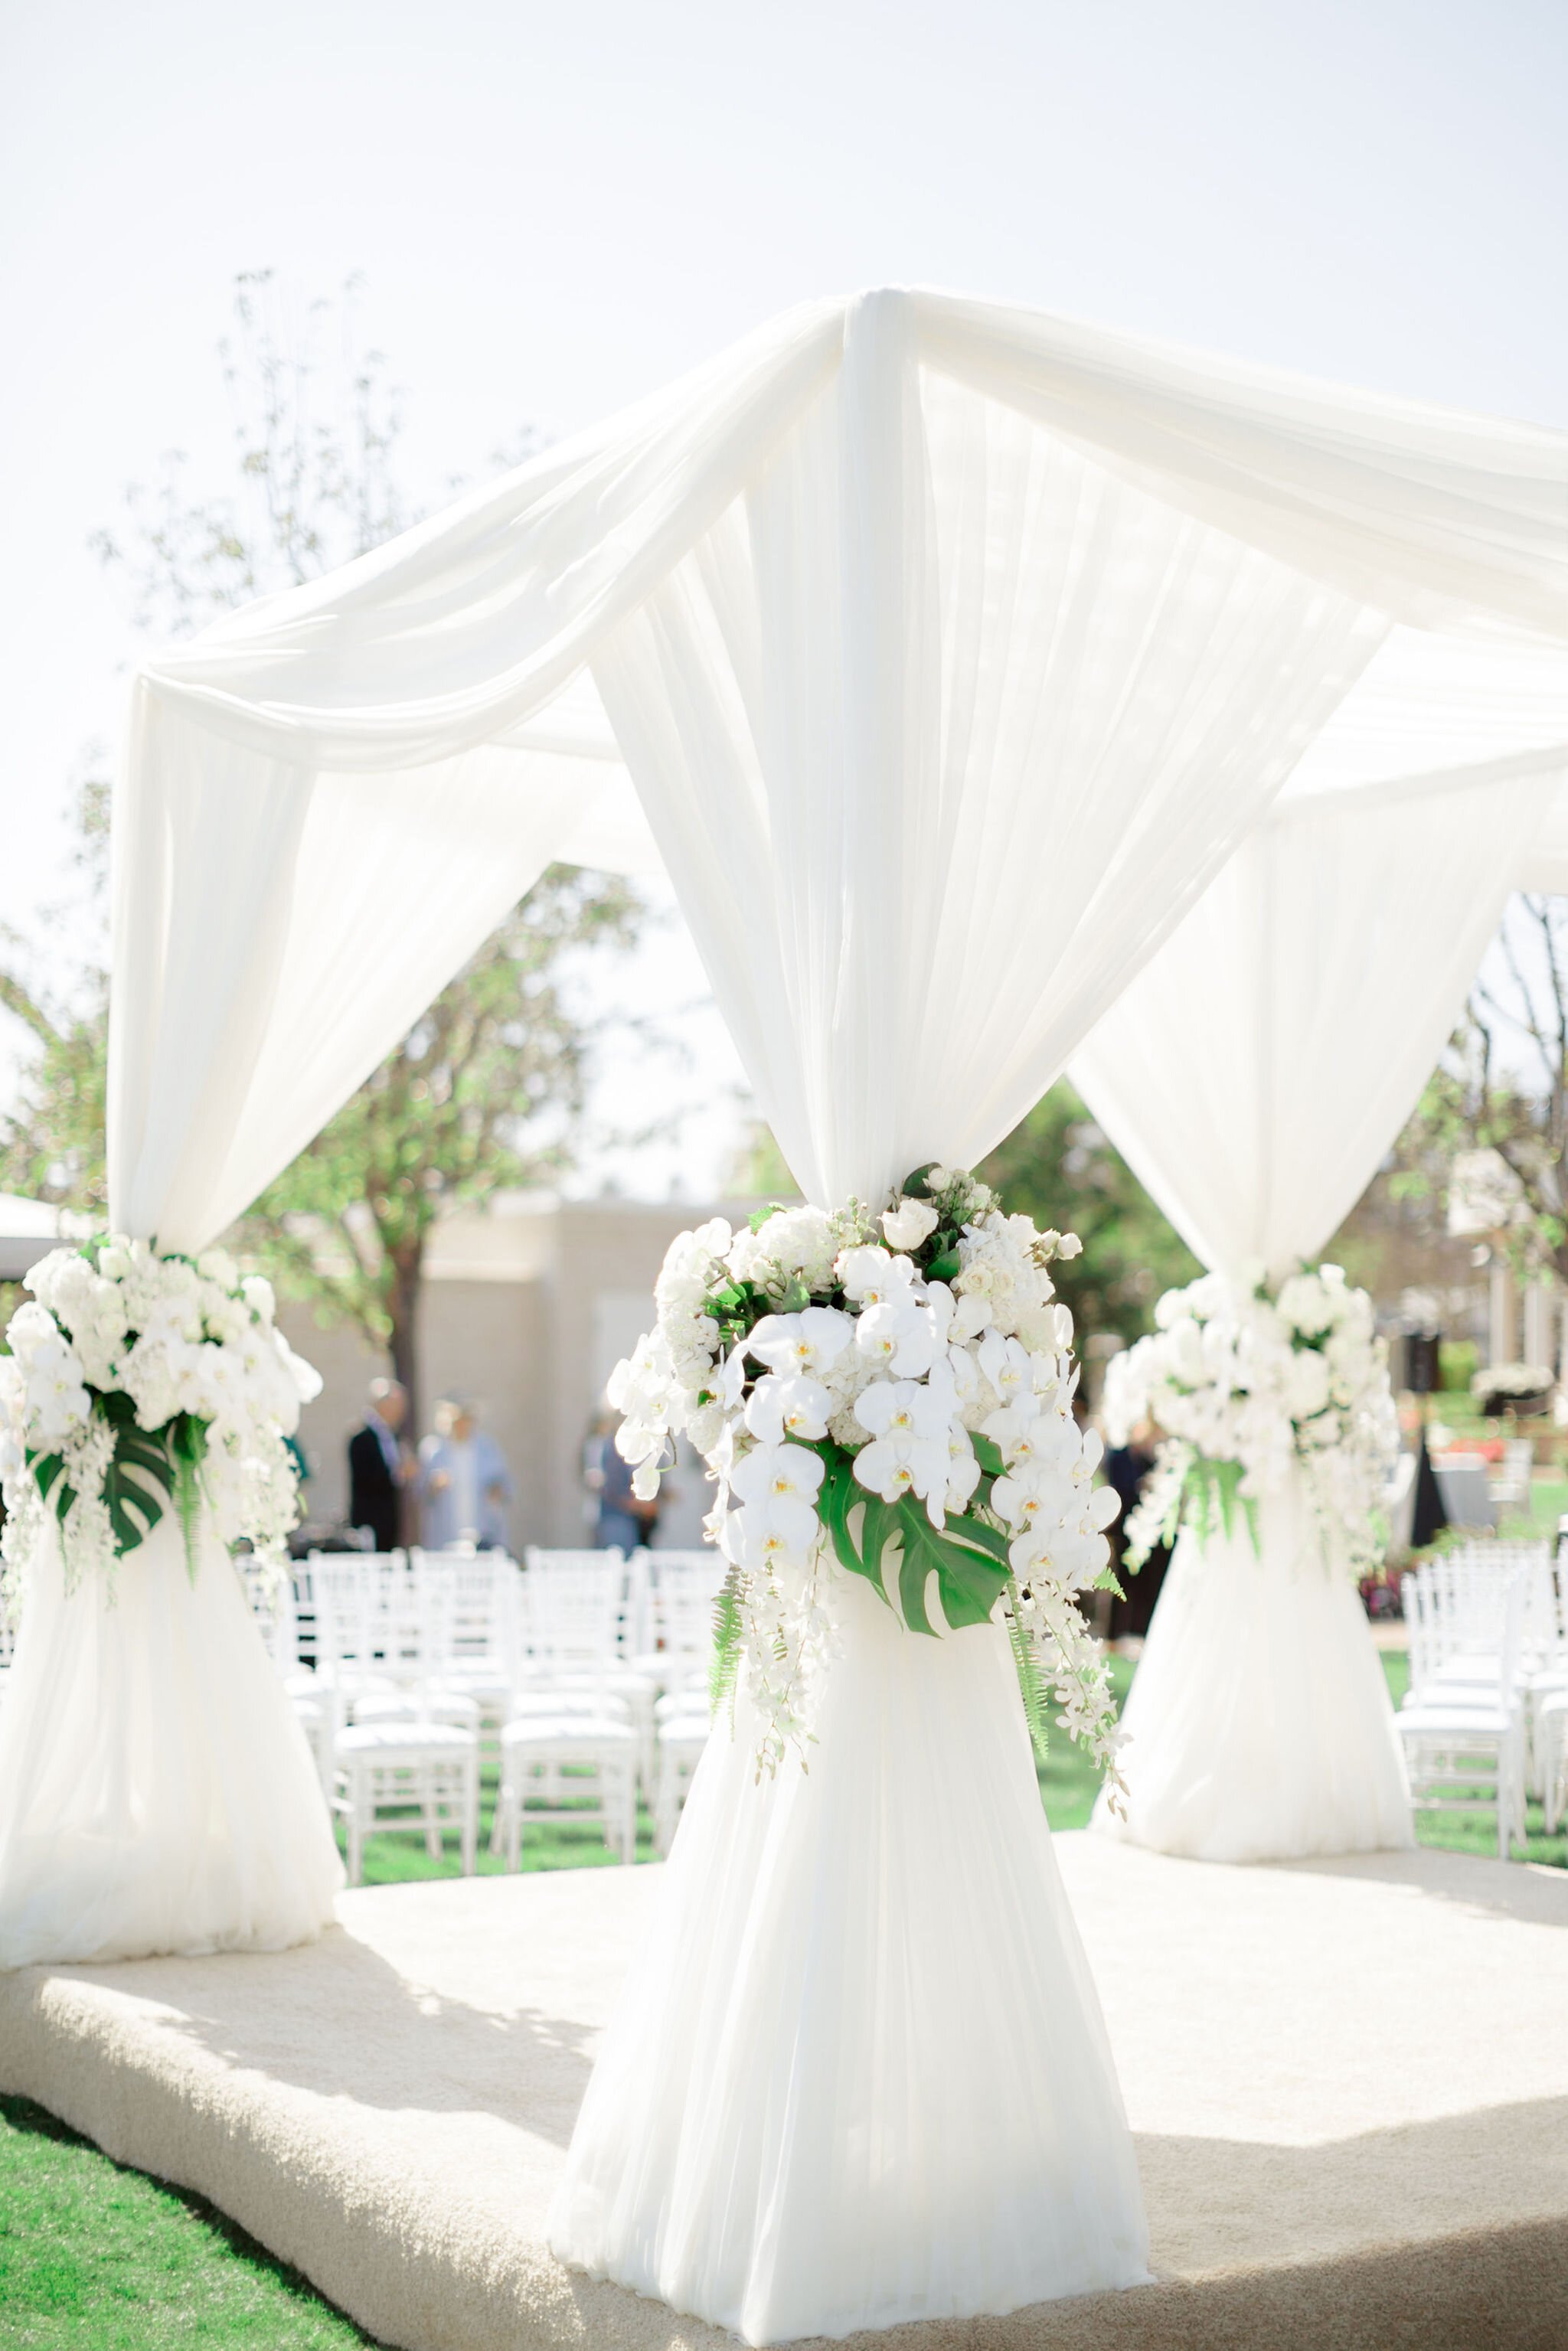 www.santabarbarawedding.com | Town and Country Event Rentals | Charissa Magno | Ceremony Structure